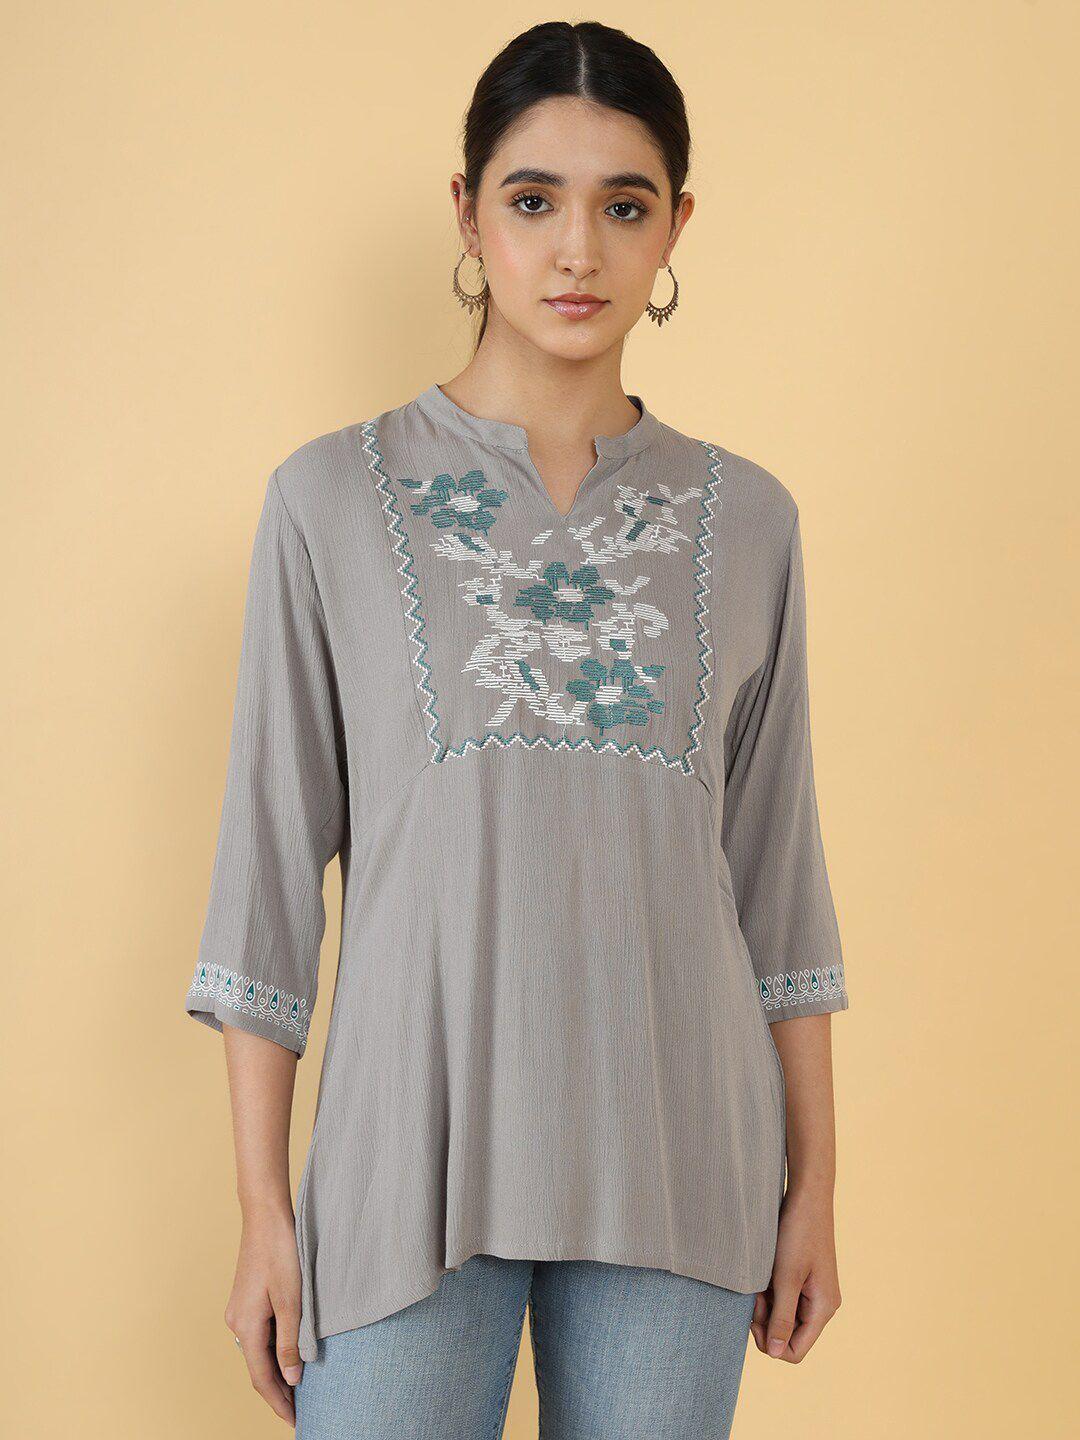 Soch Grey & White Embroidered Tunic